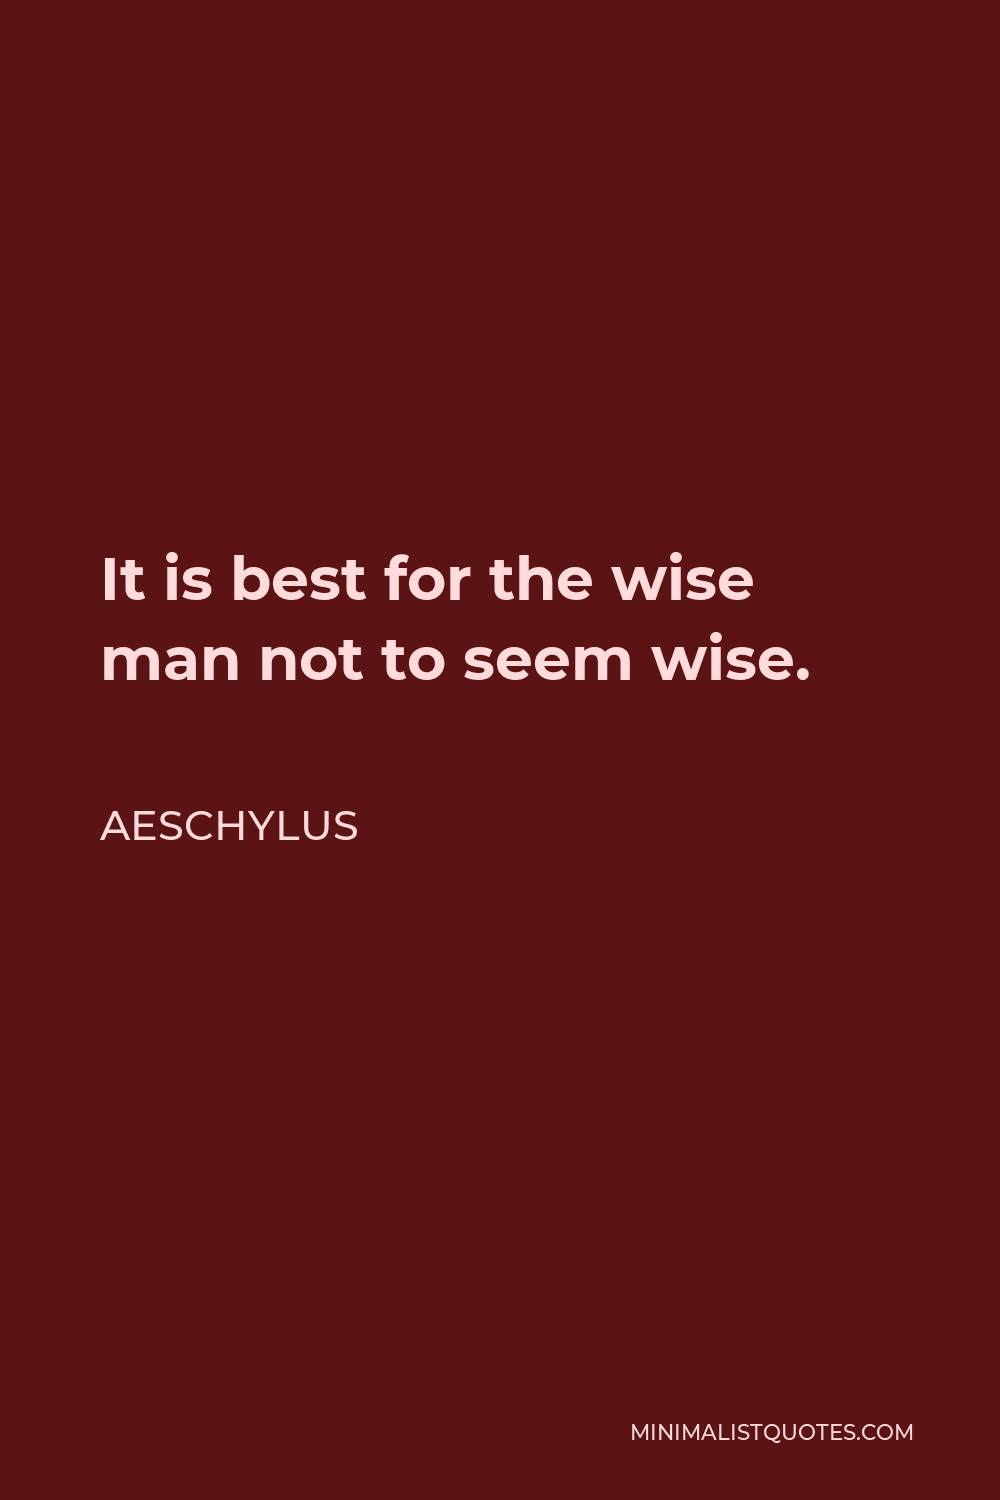 Aeschylus Quote - It is best for the wise man not to seem wise.